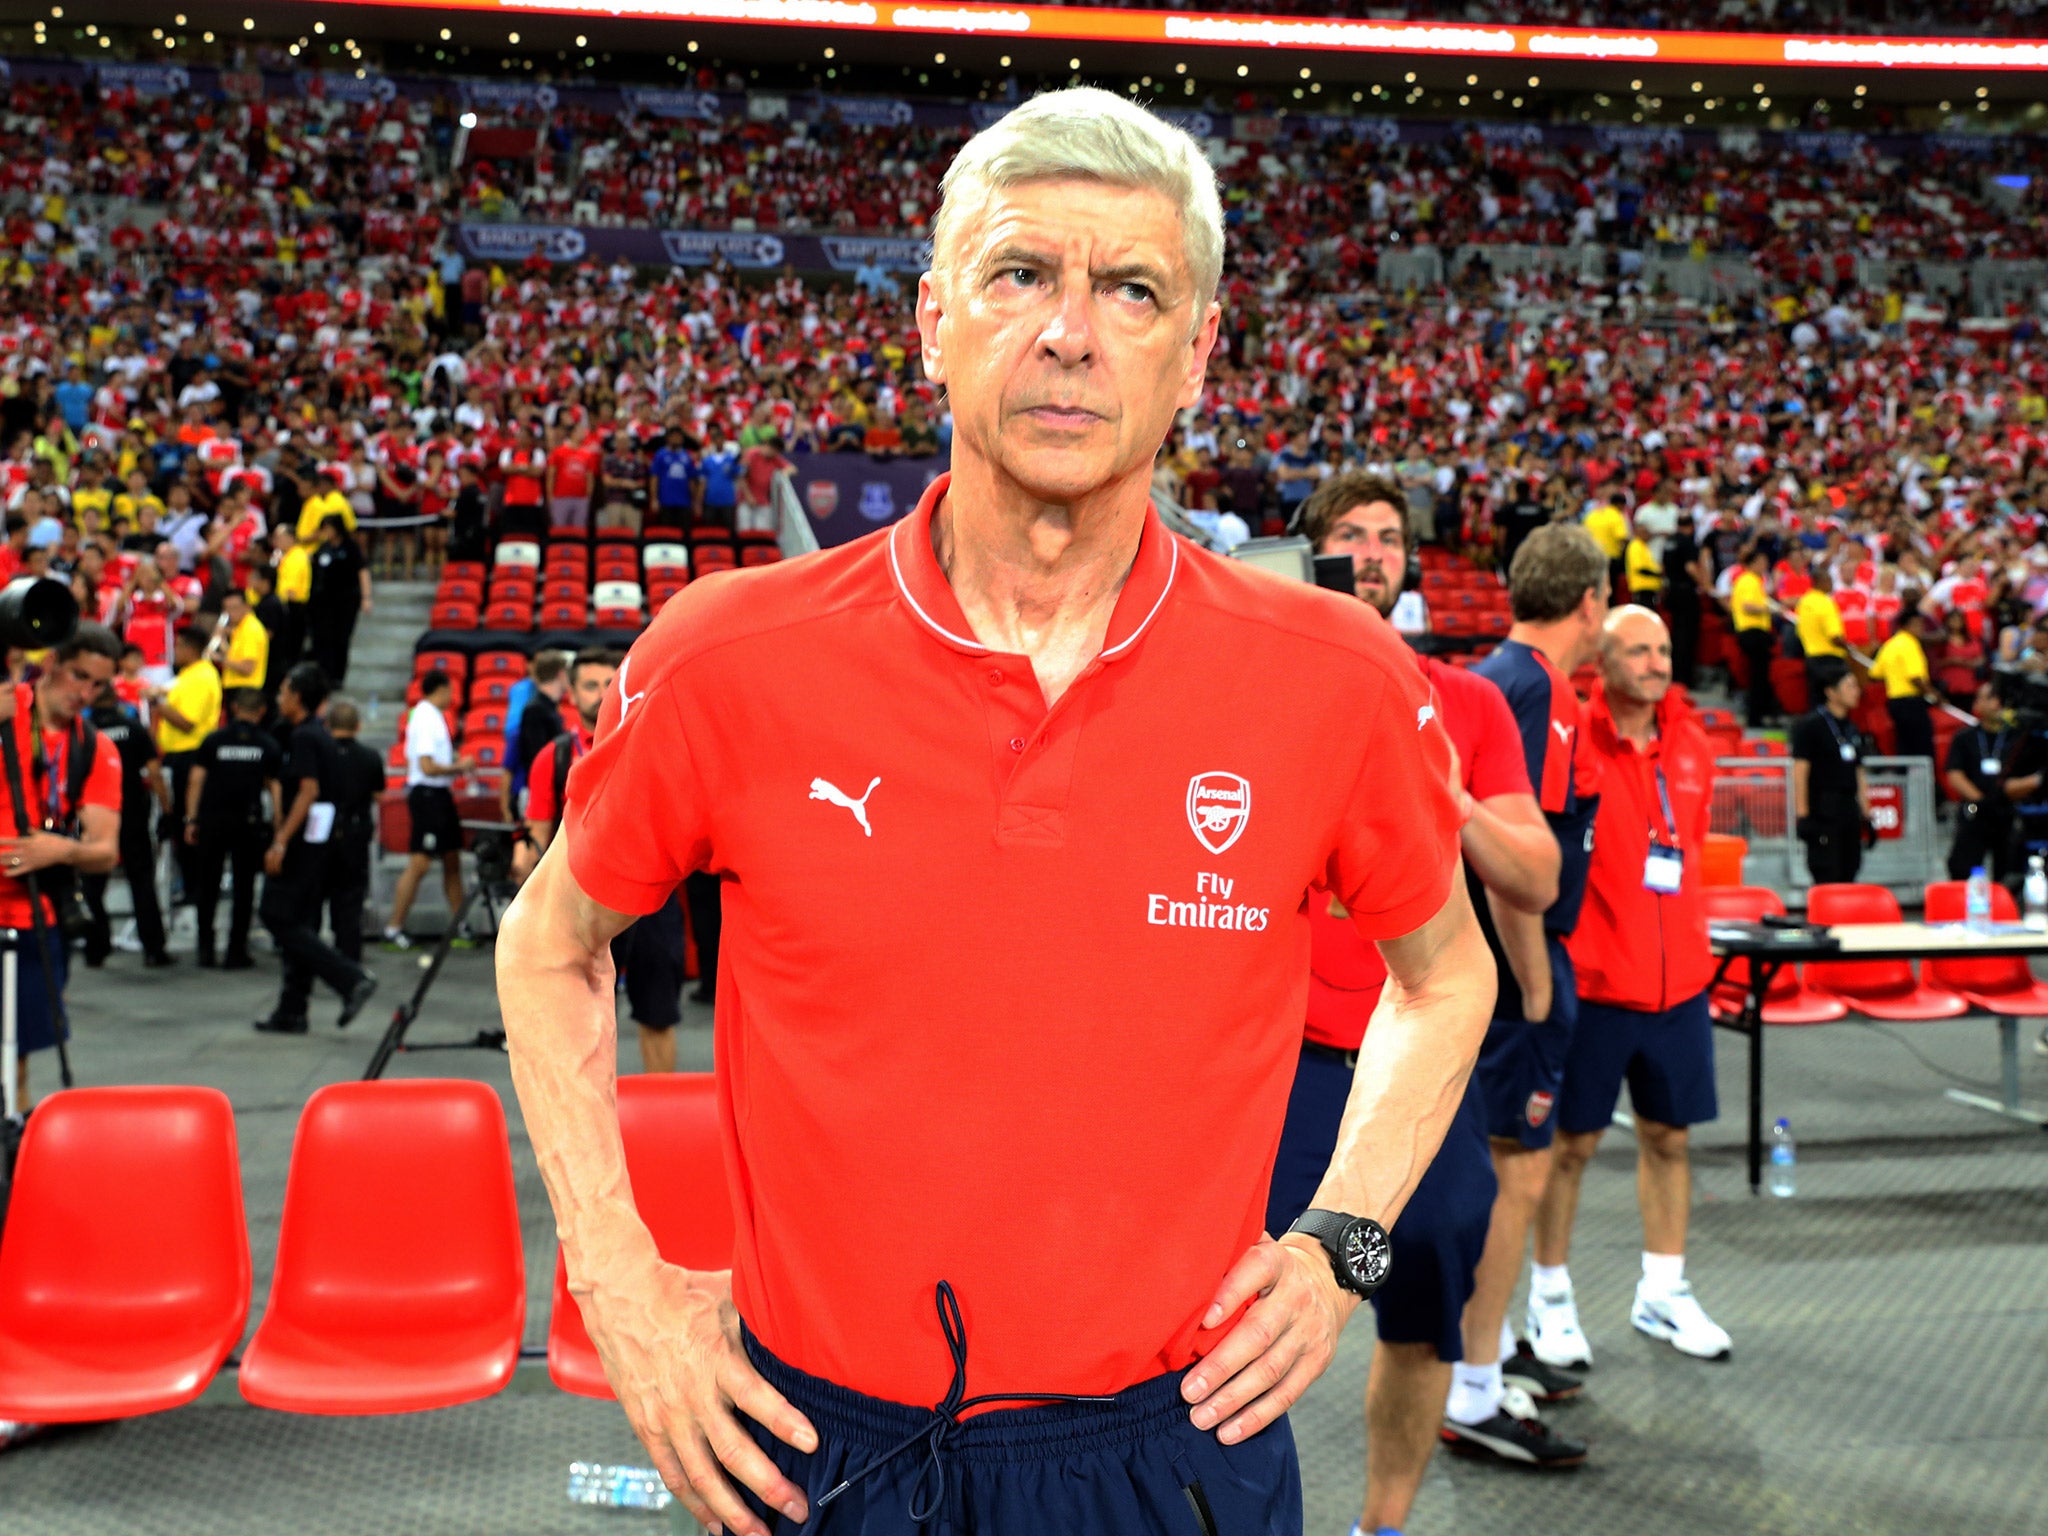 Wenger: 'I am more committed than ever'